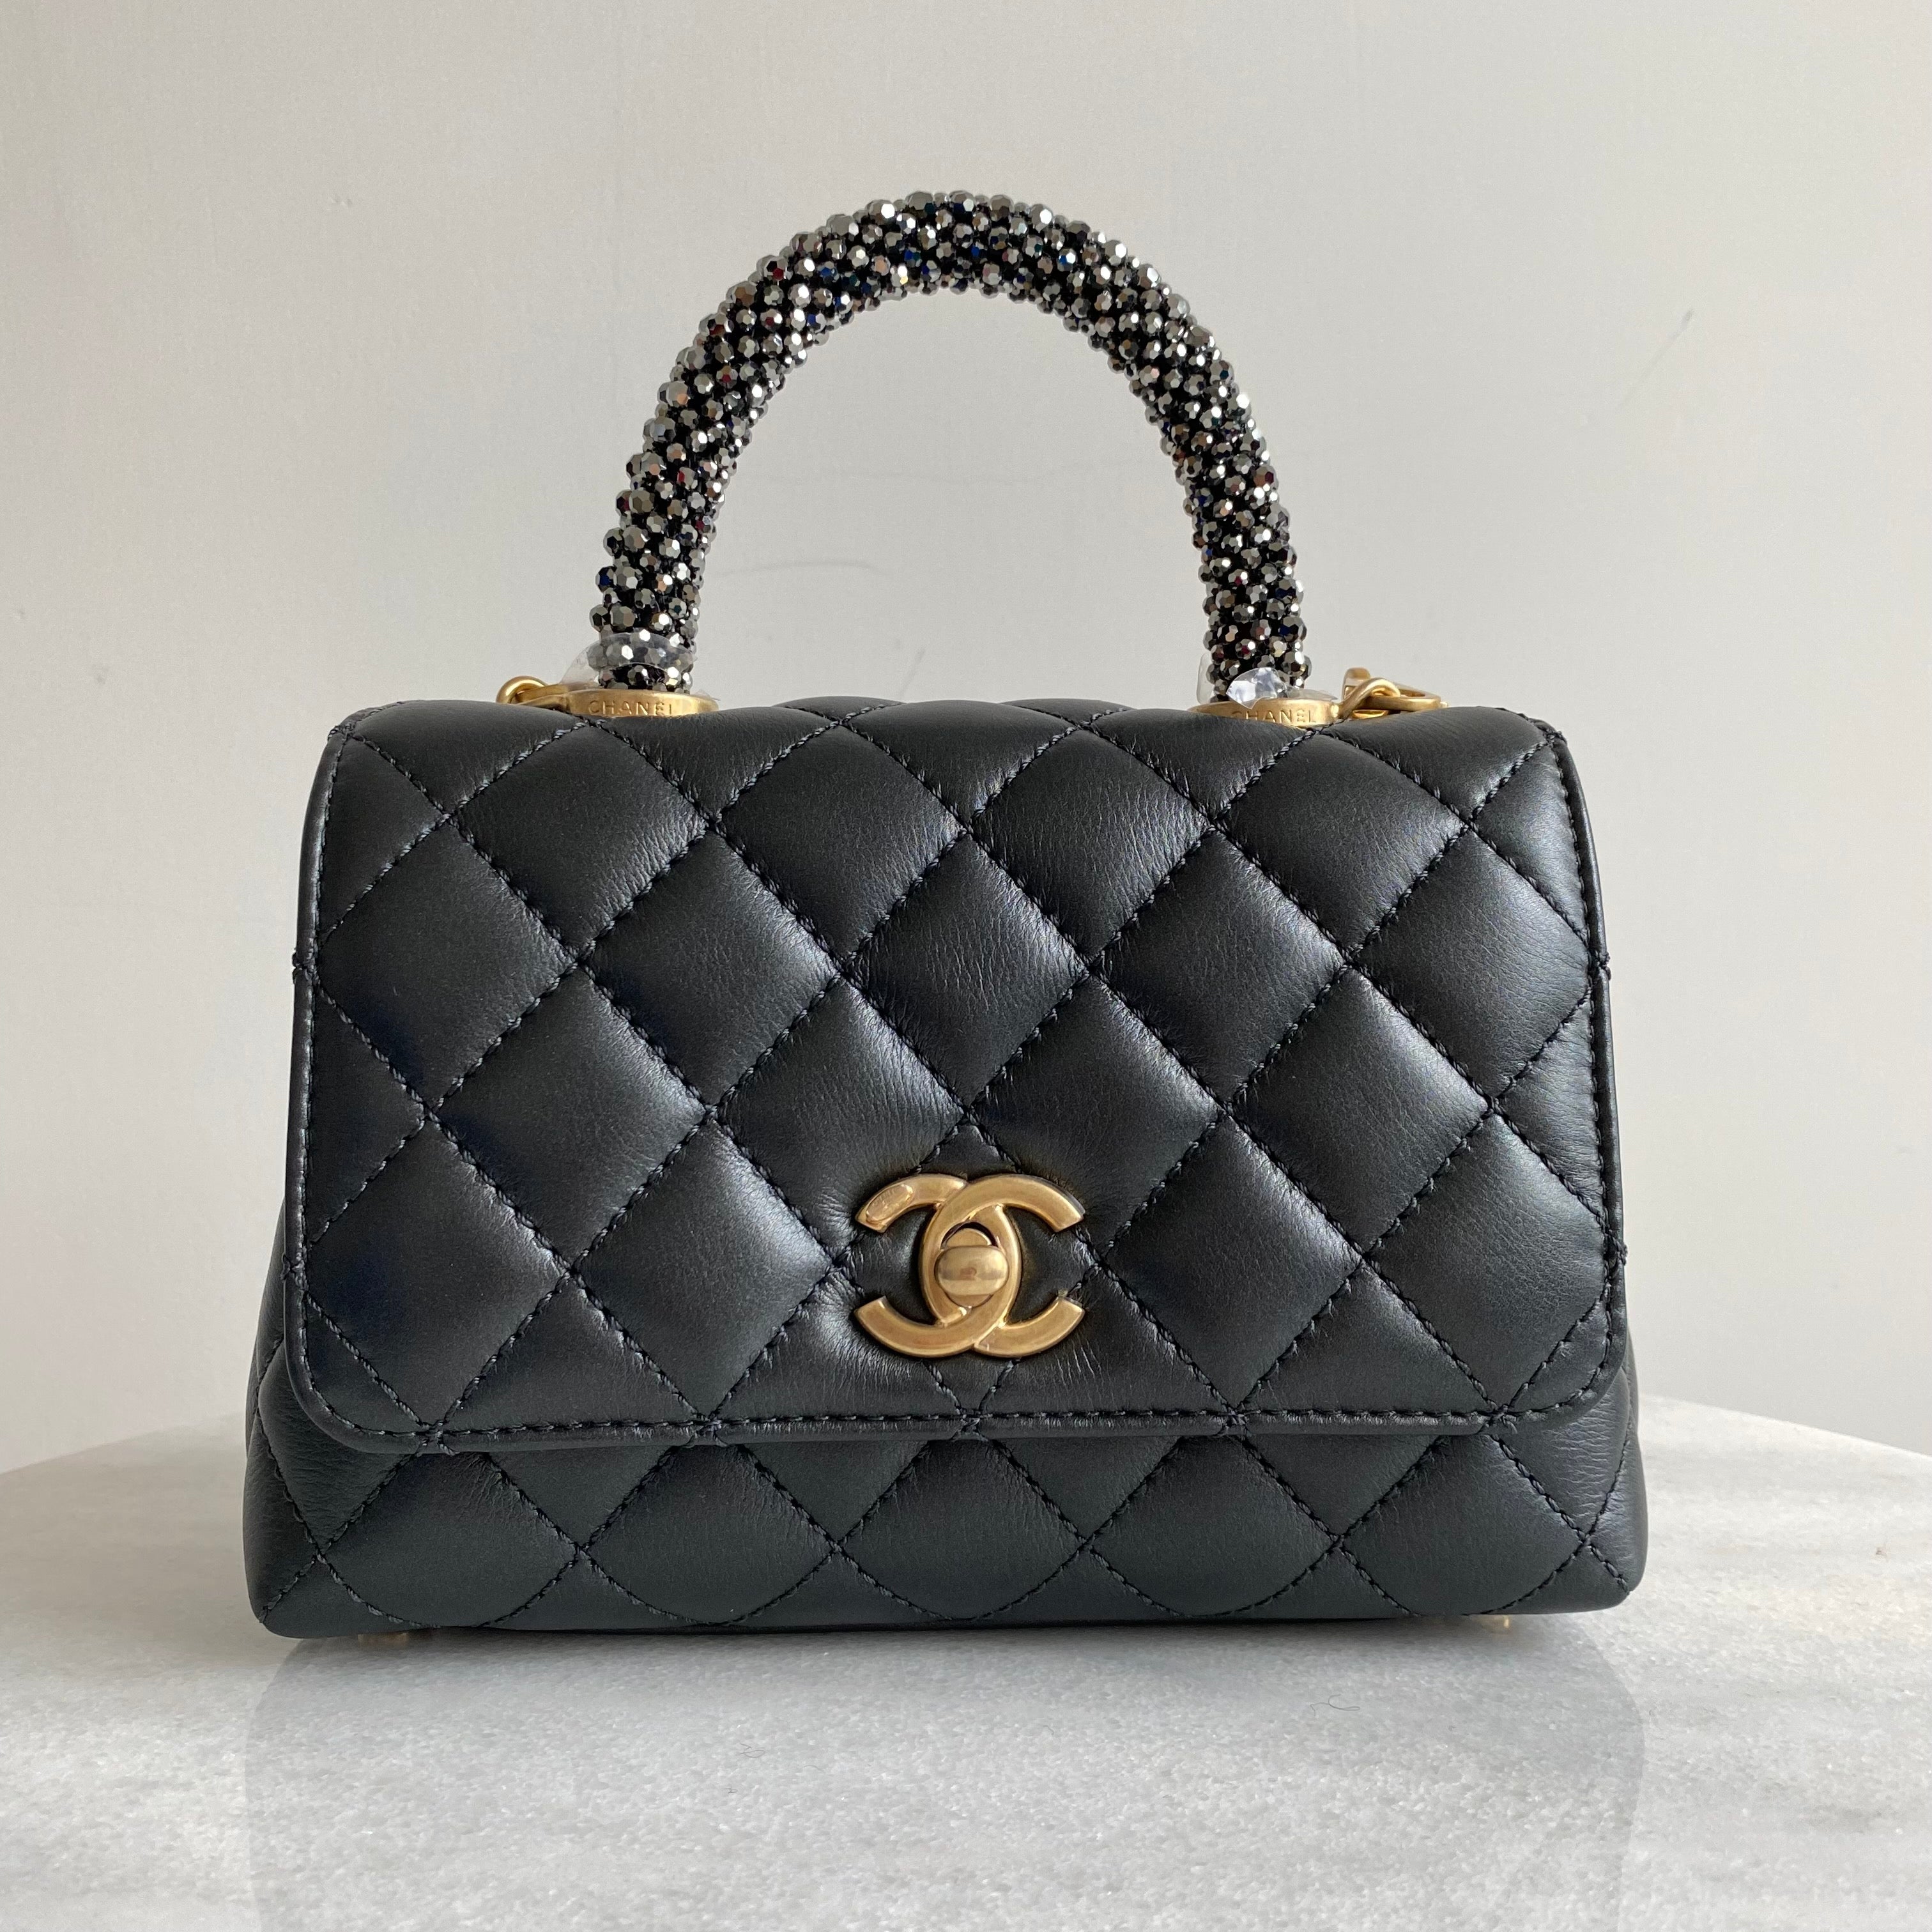 Chanel Coco Handle Bag Price List & Reference Guide – Bagaholic